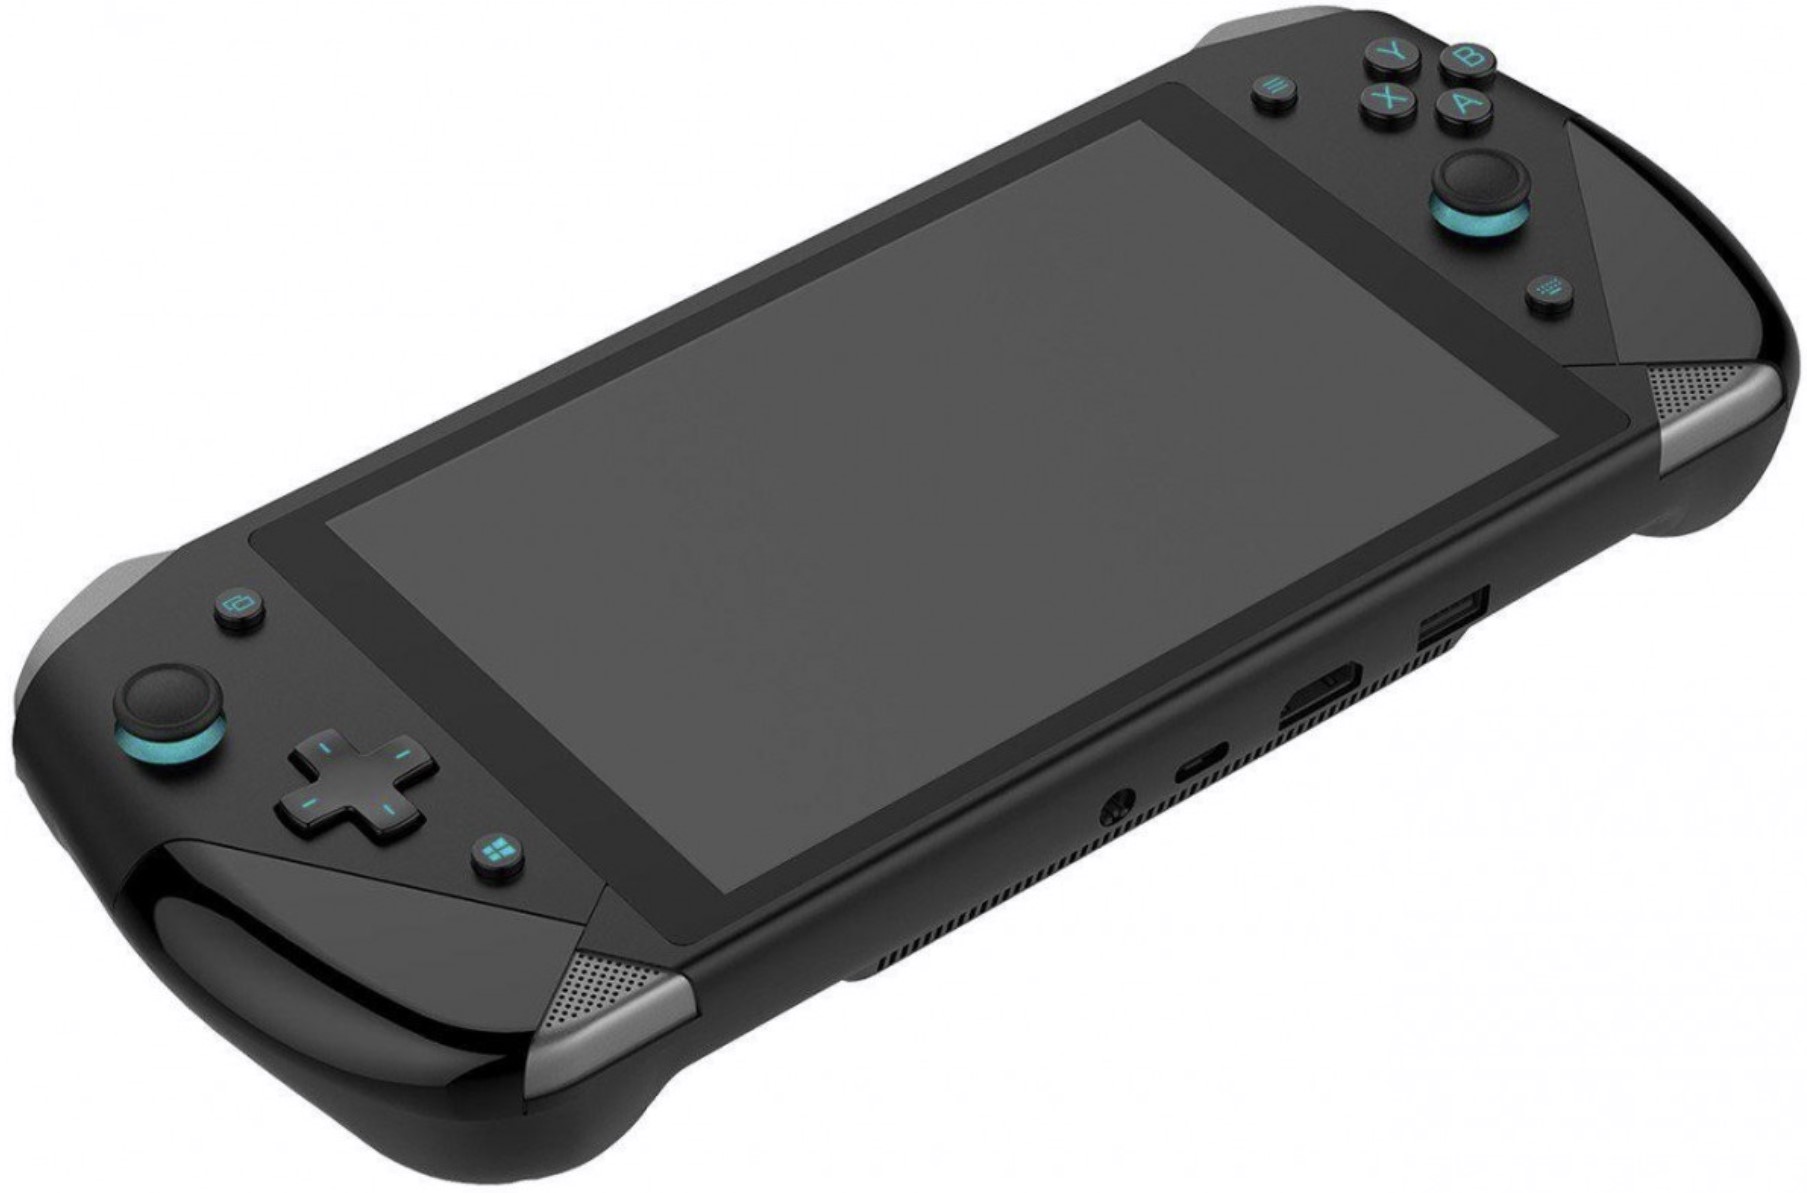 Logitech G and Tencent team up on cloud gaming handheld console